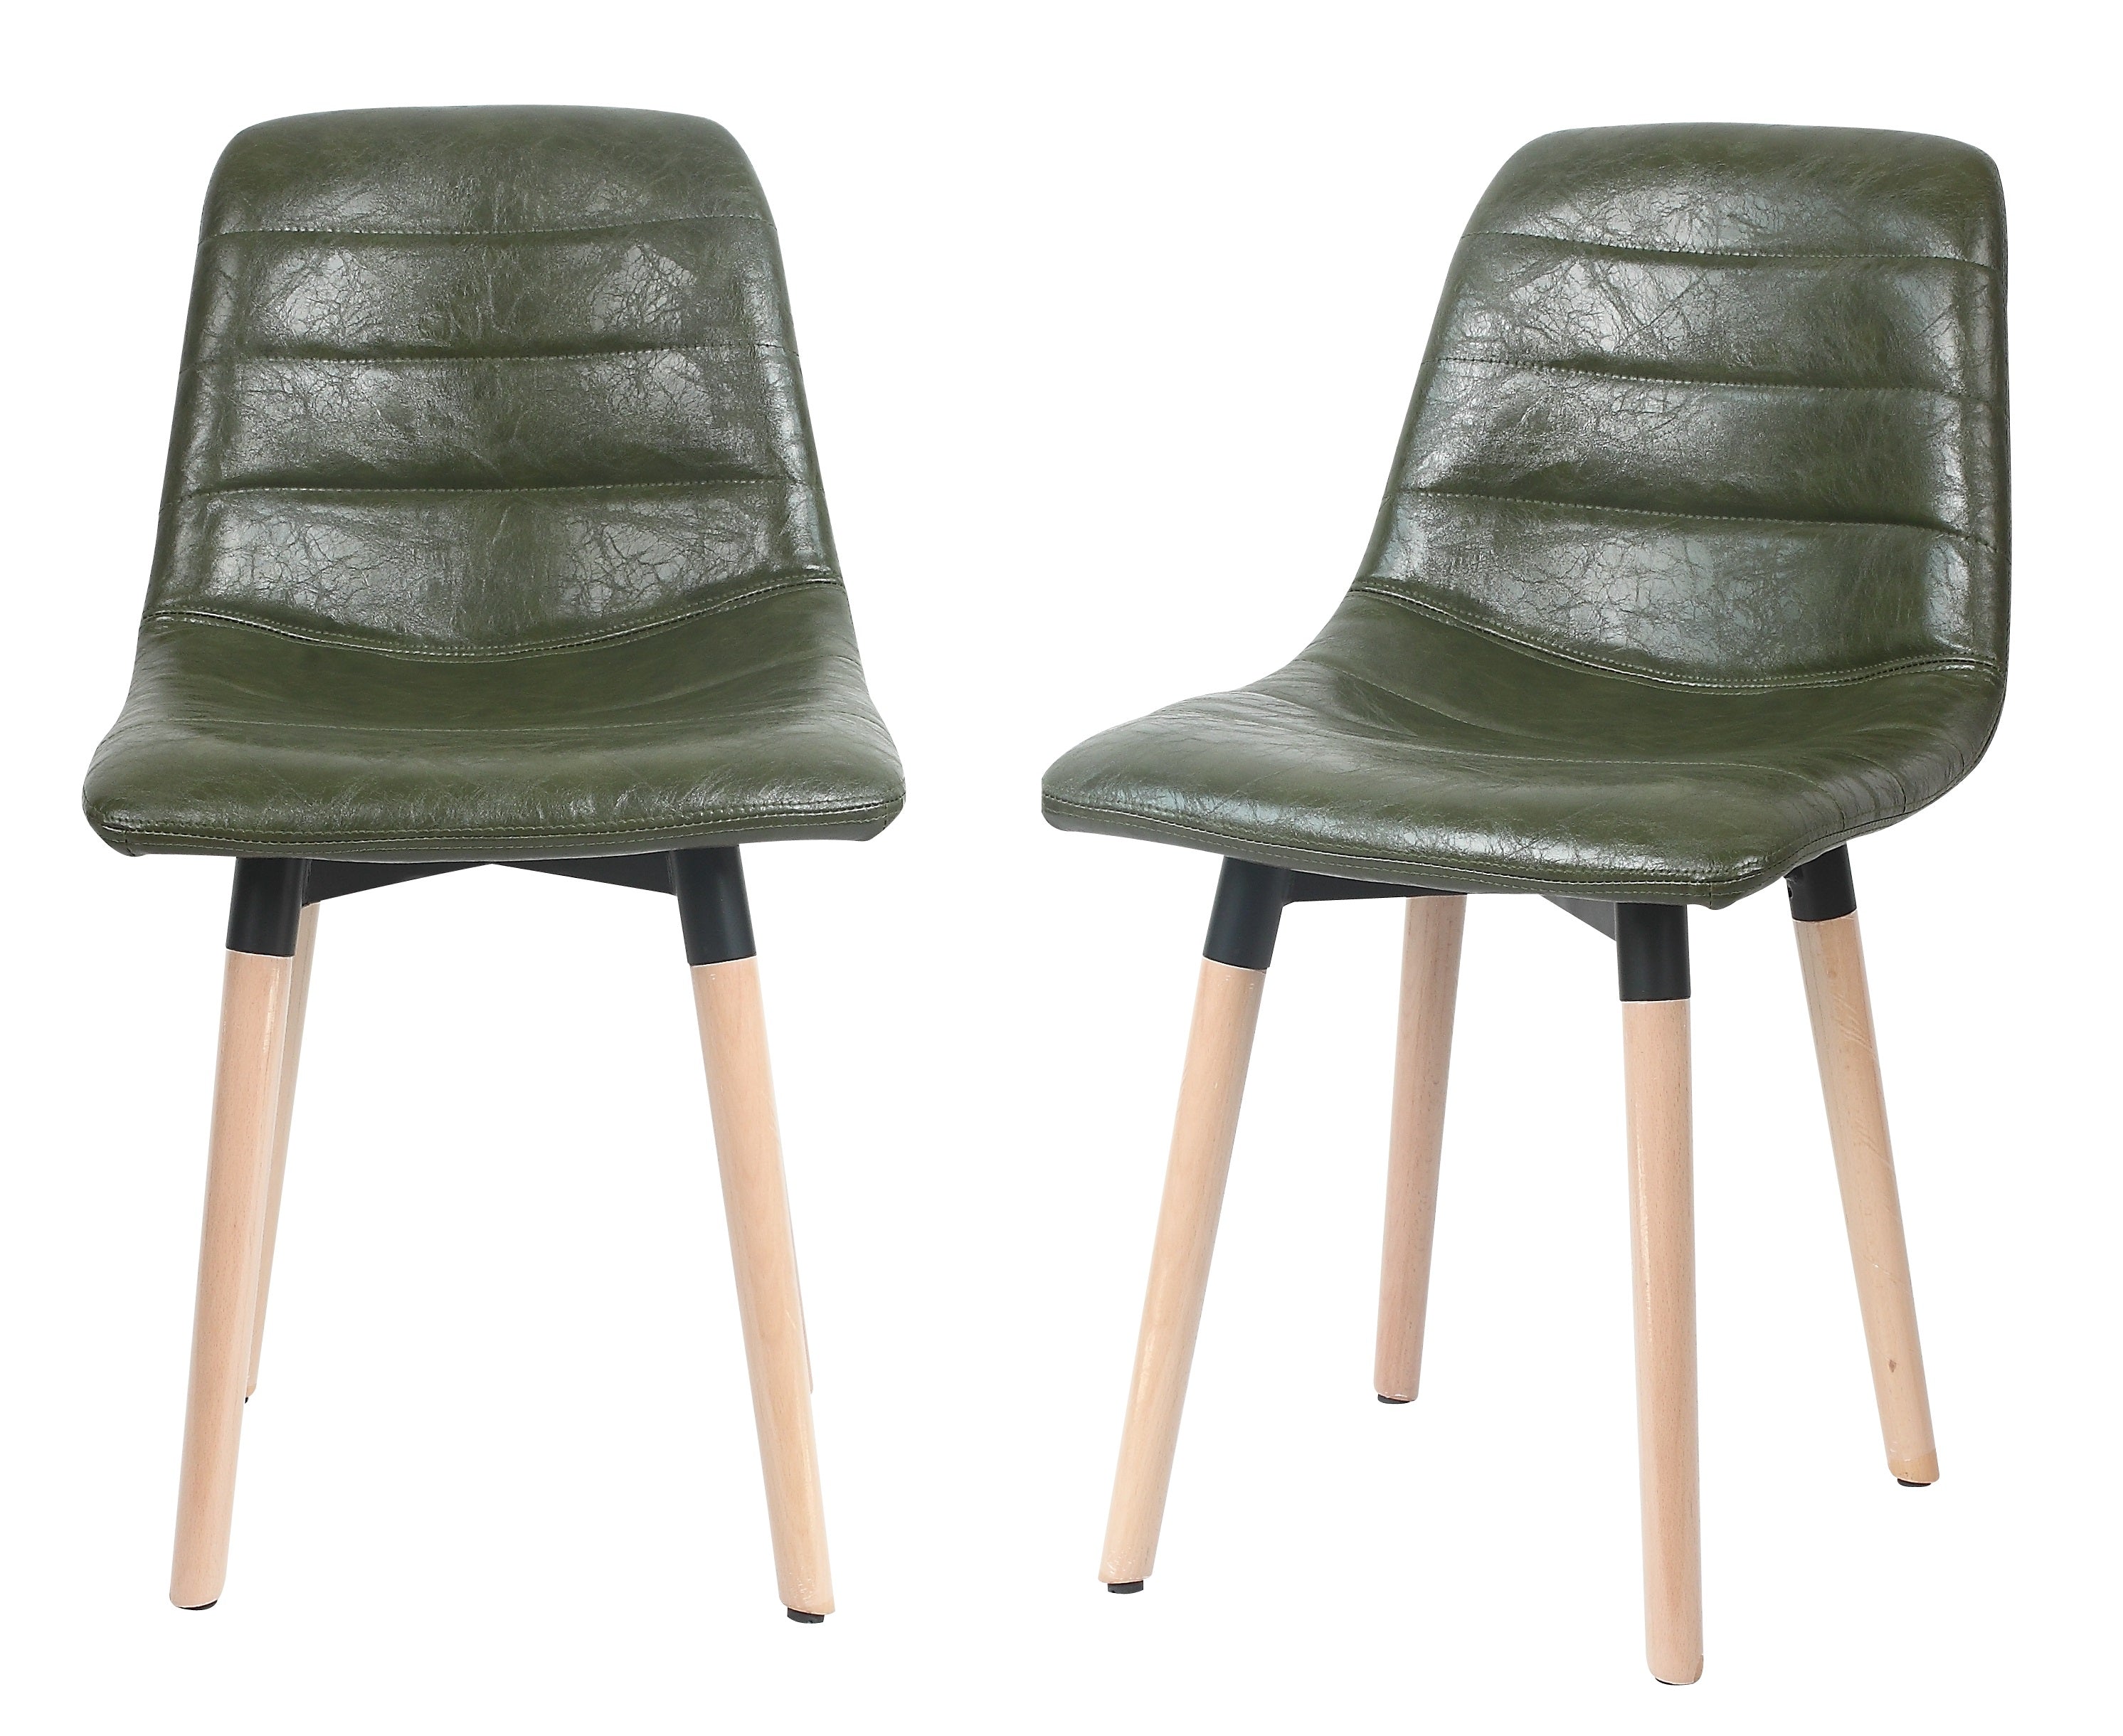 ViscoLogic LUXUS Dining Chairs (2, Serene Green)